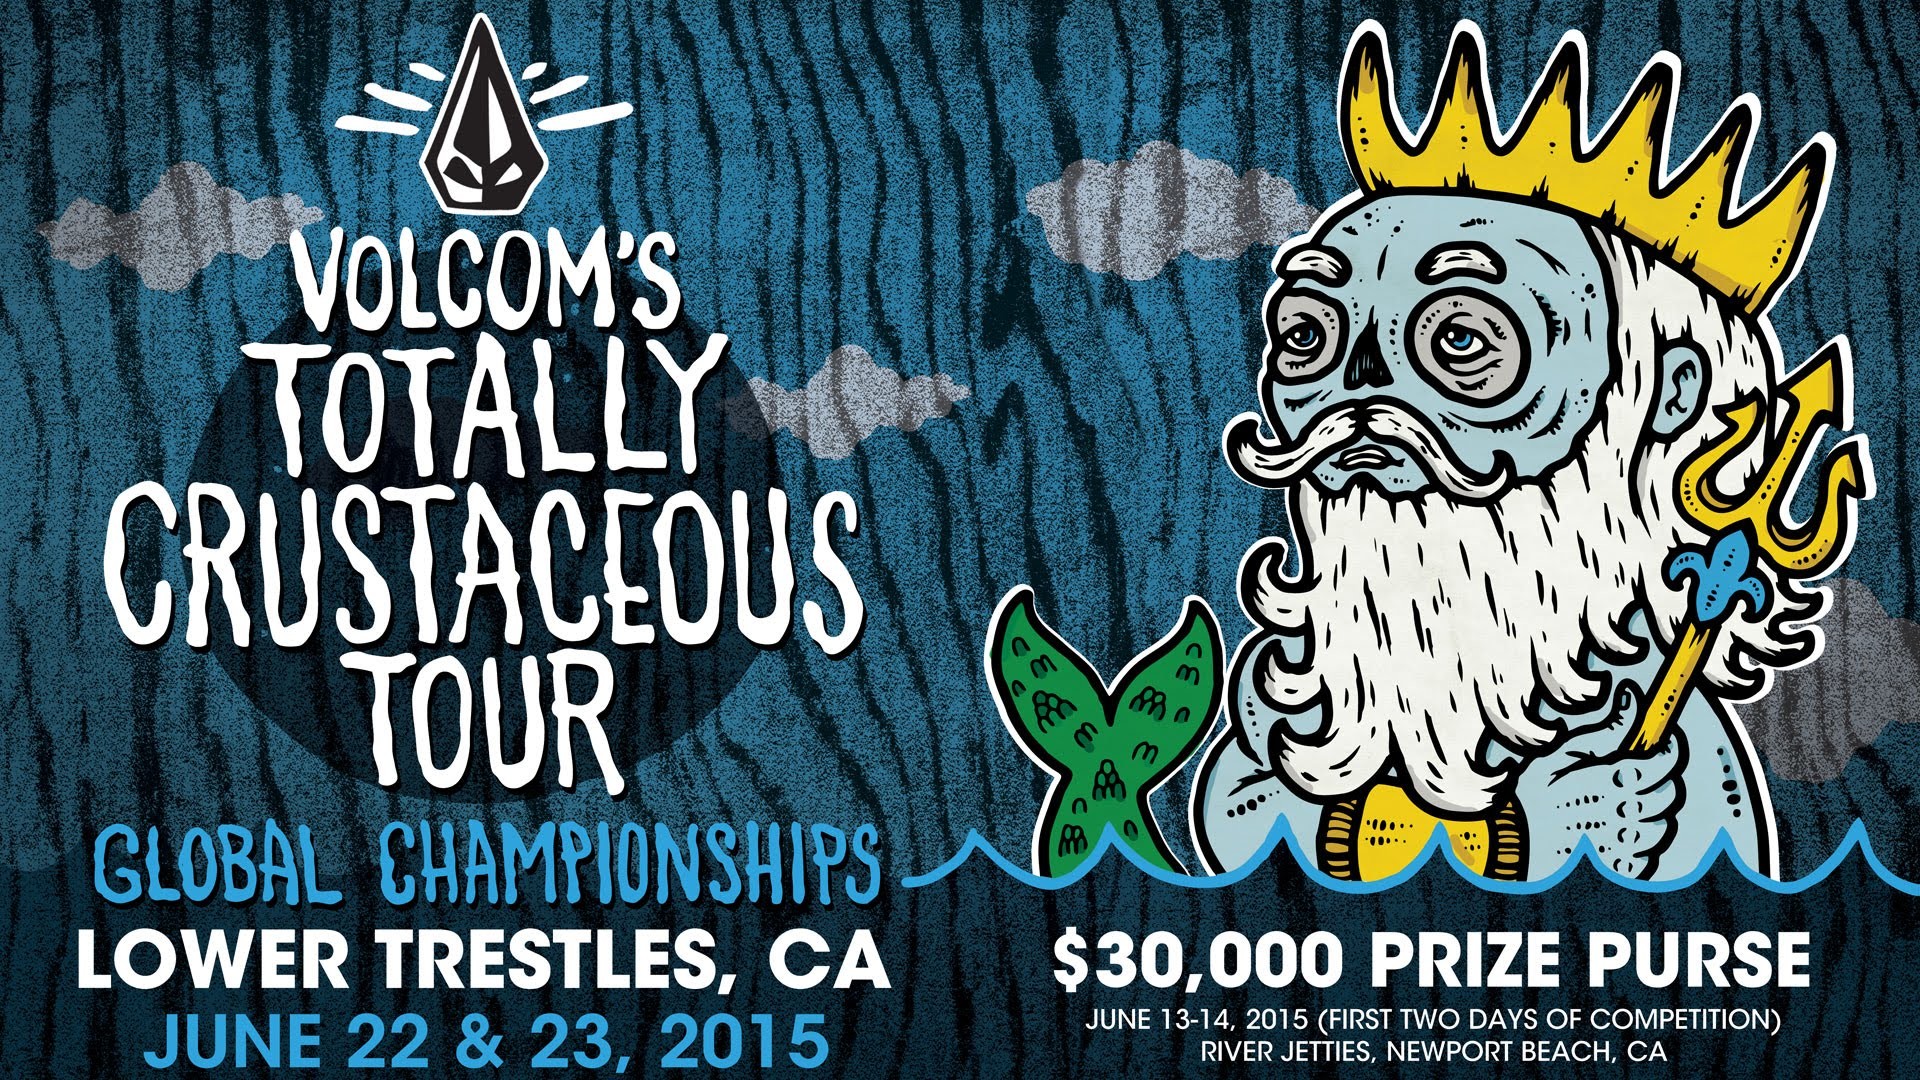 1920x1080 Volcom's Totally Crustaceous Tour Championships 2015 - Teaser - YouTube